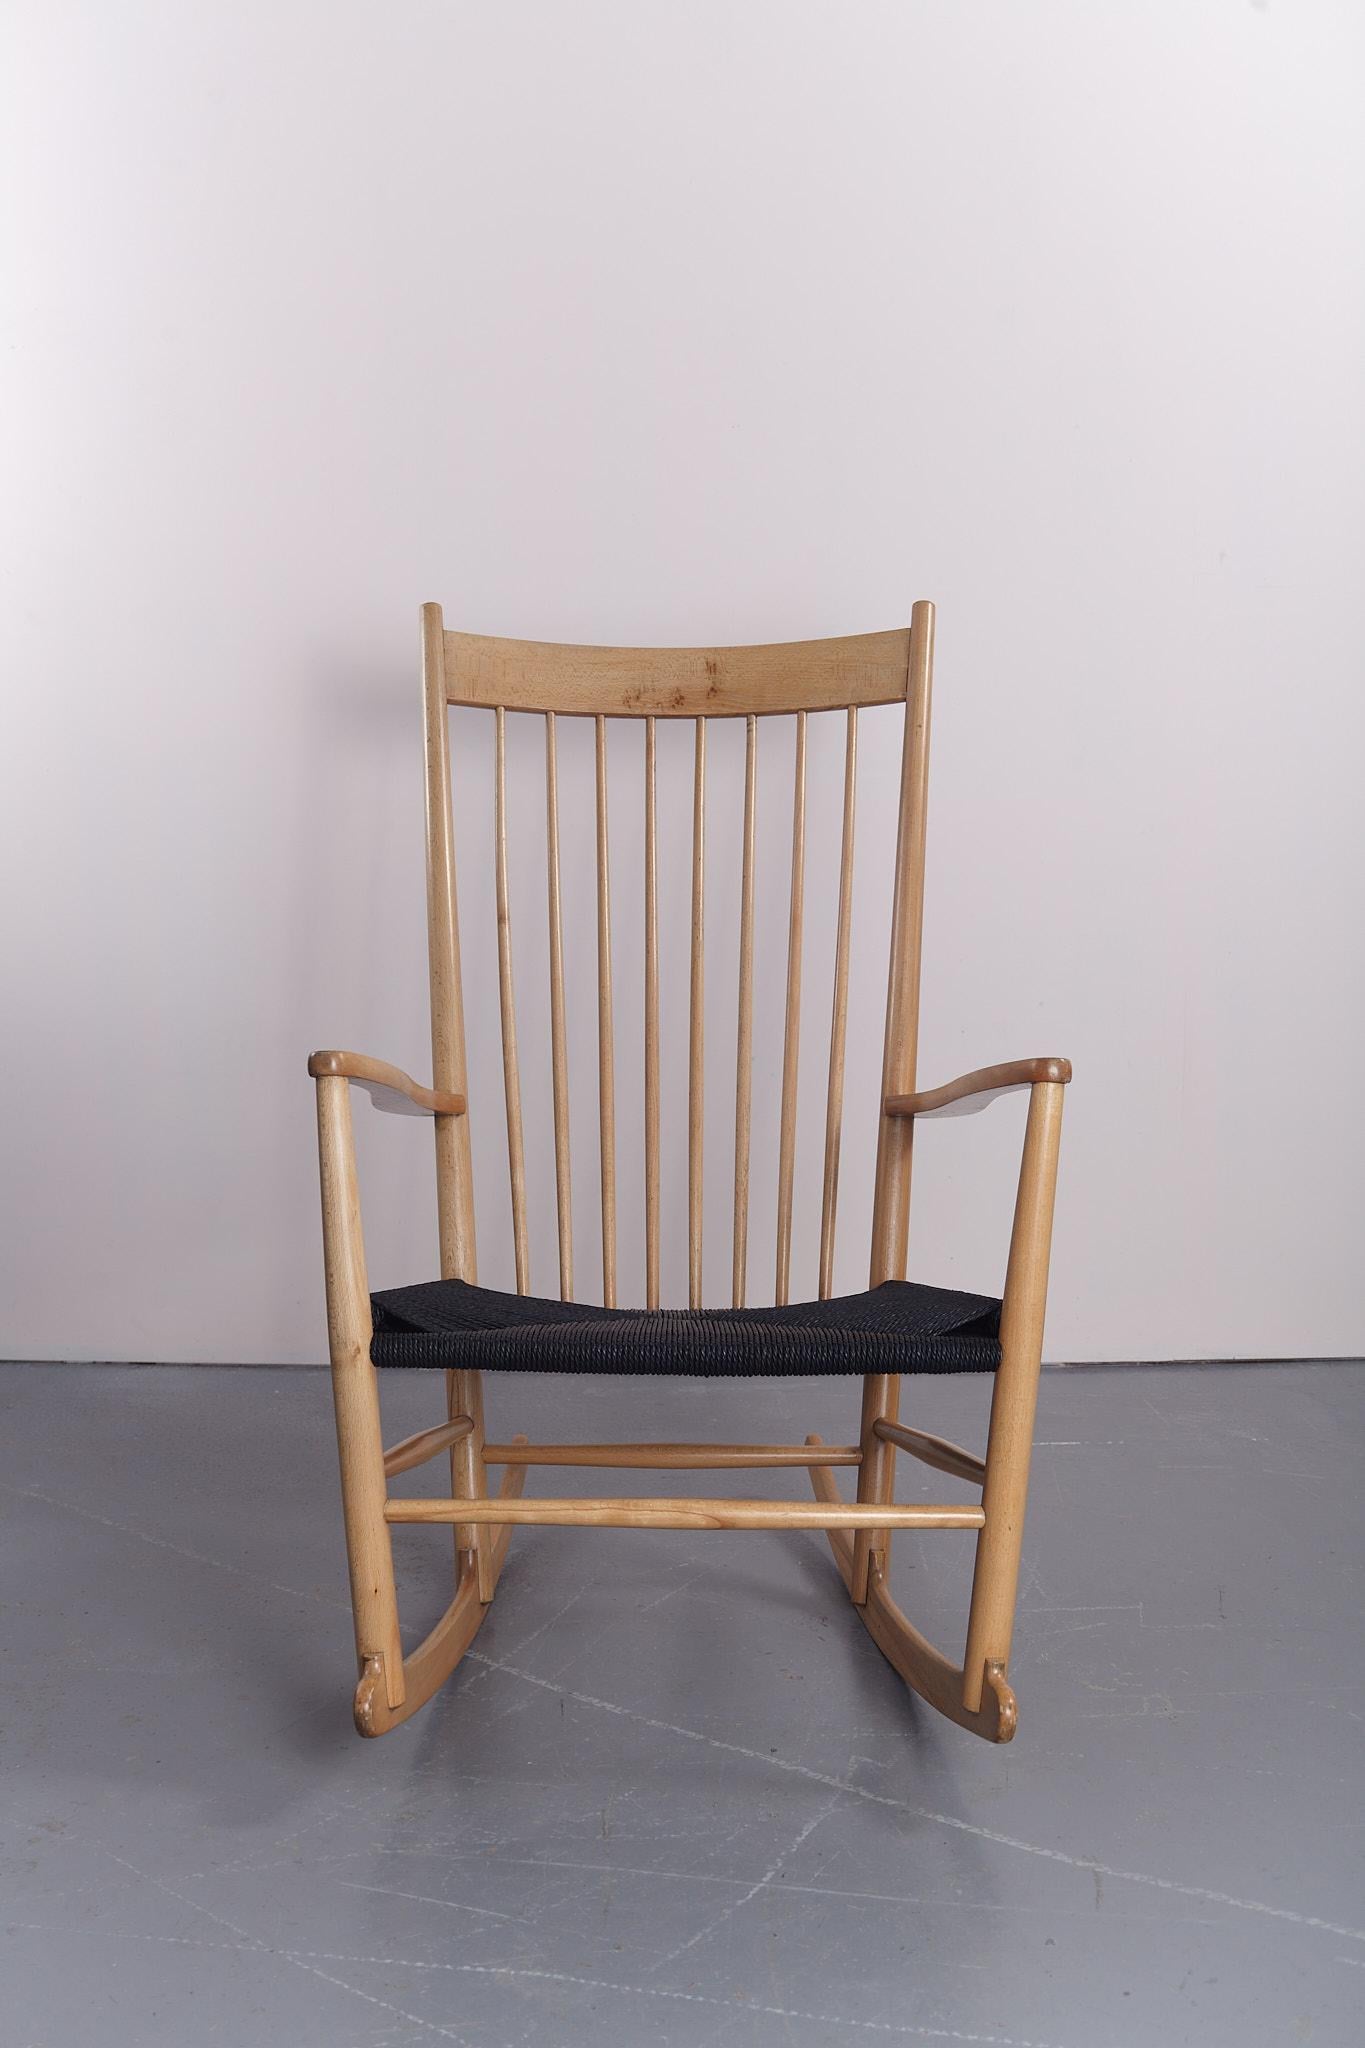 The Rocking chair J16, designed in 1944, was Hans Wegner’s first production chair. With design cues taken from the Shaker style and the Windsor chair this rocker is generous in proportion yet retains a light elegant presence in a space. 

Wegner